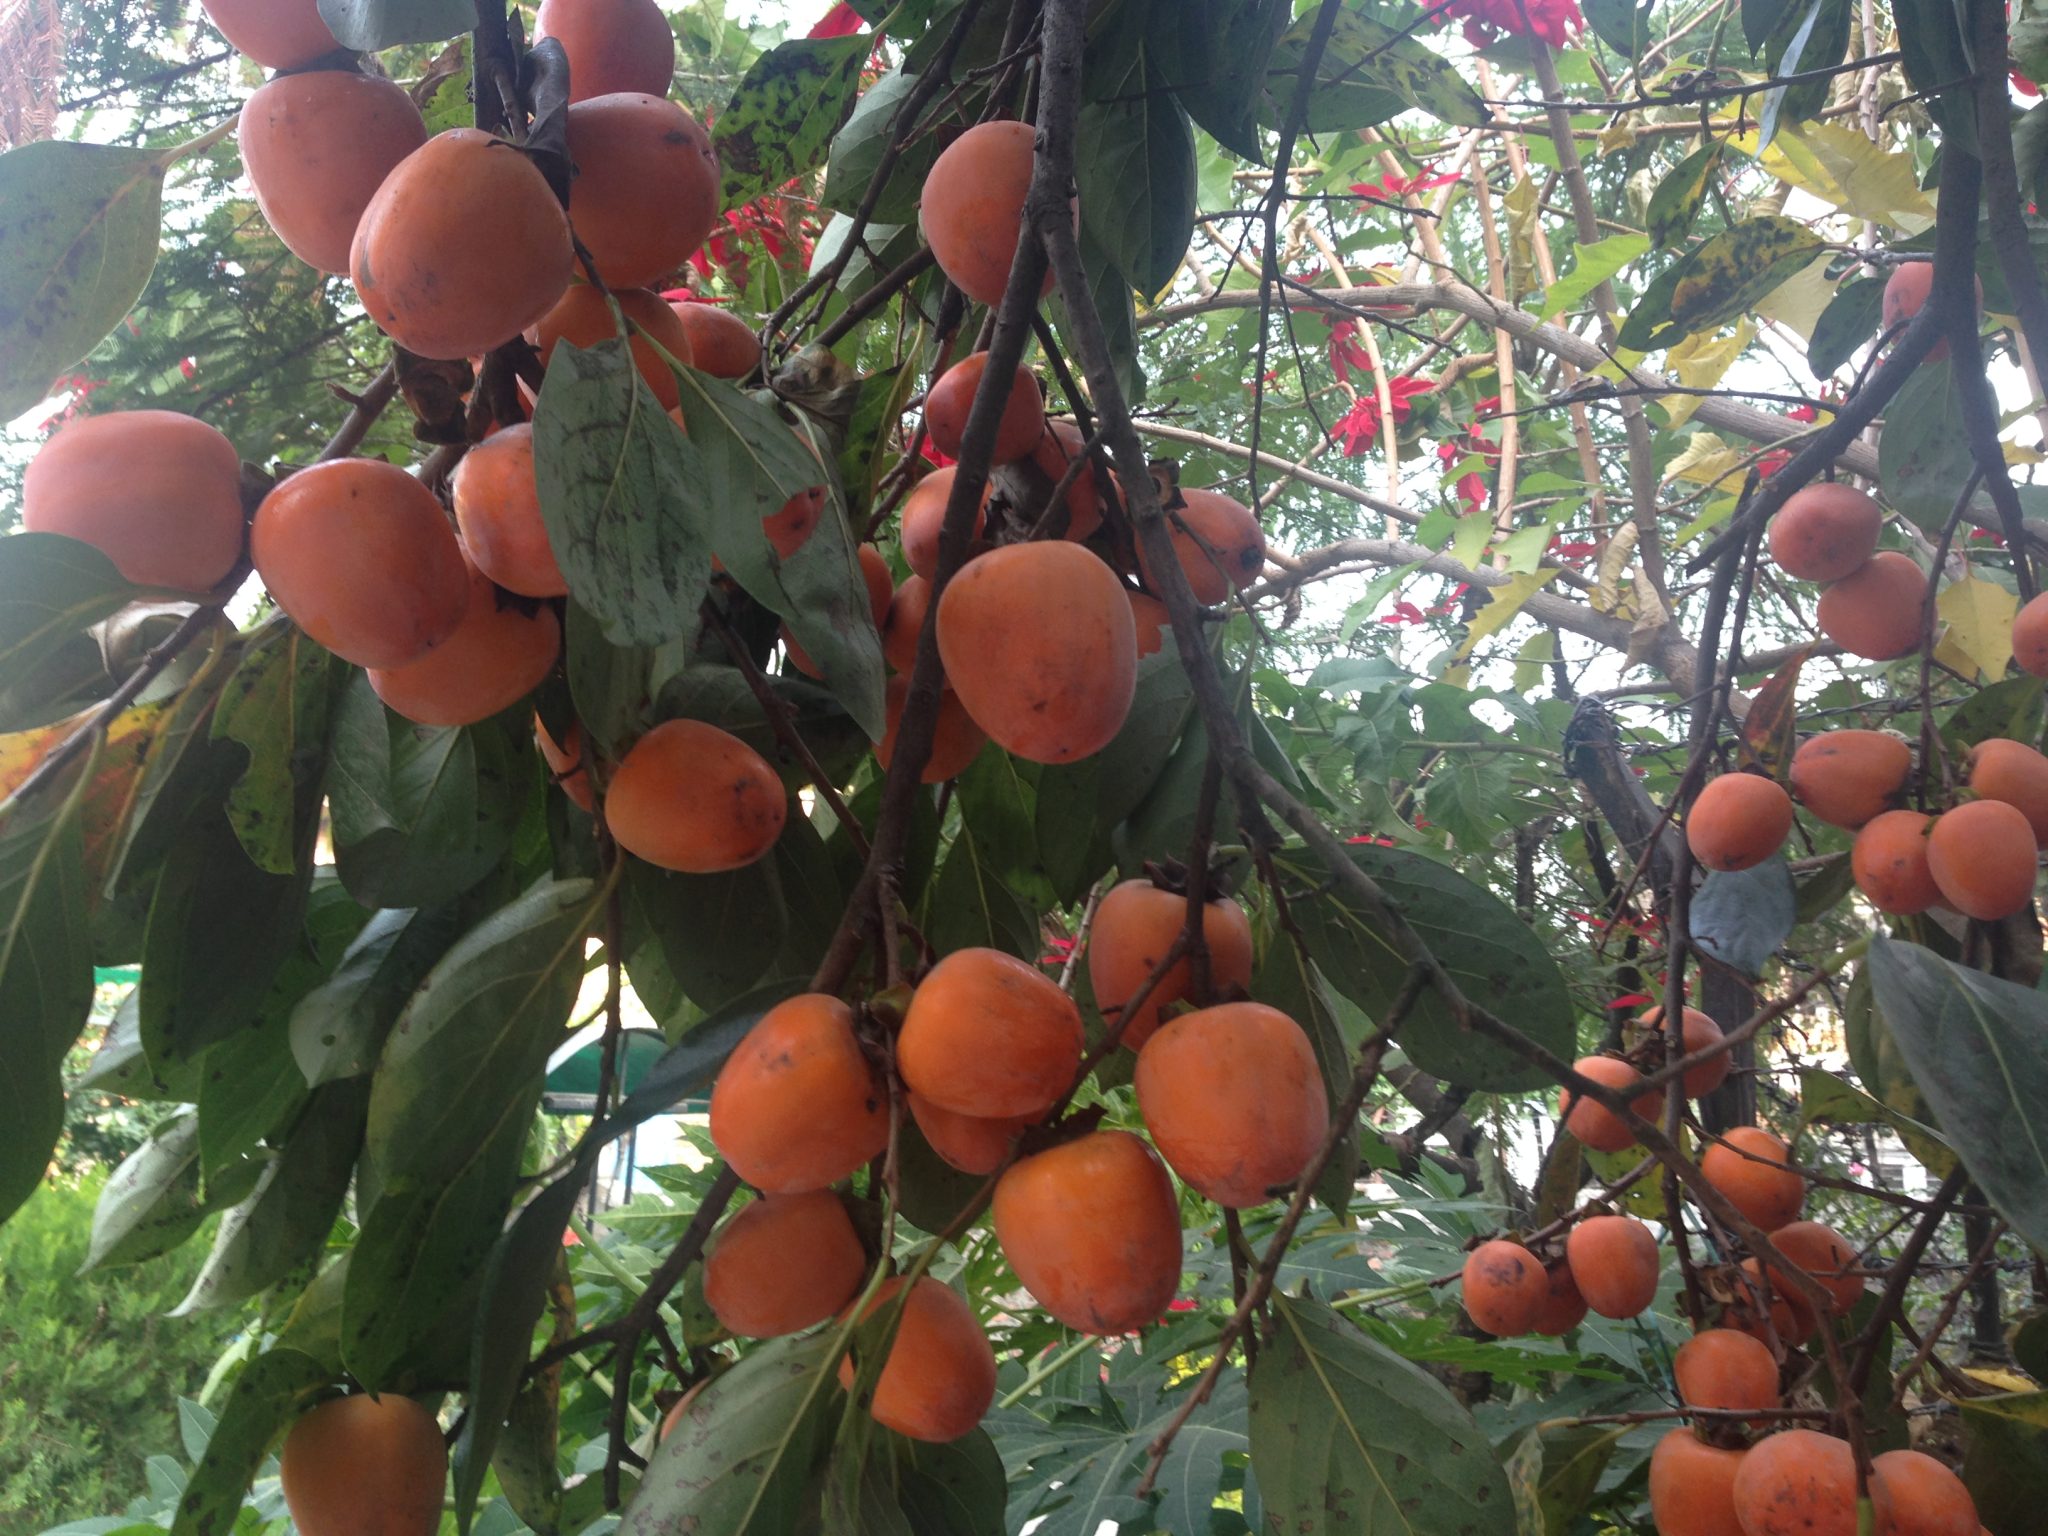 A delightful tree laden with ripe persimmons